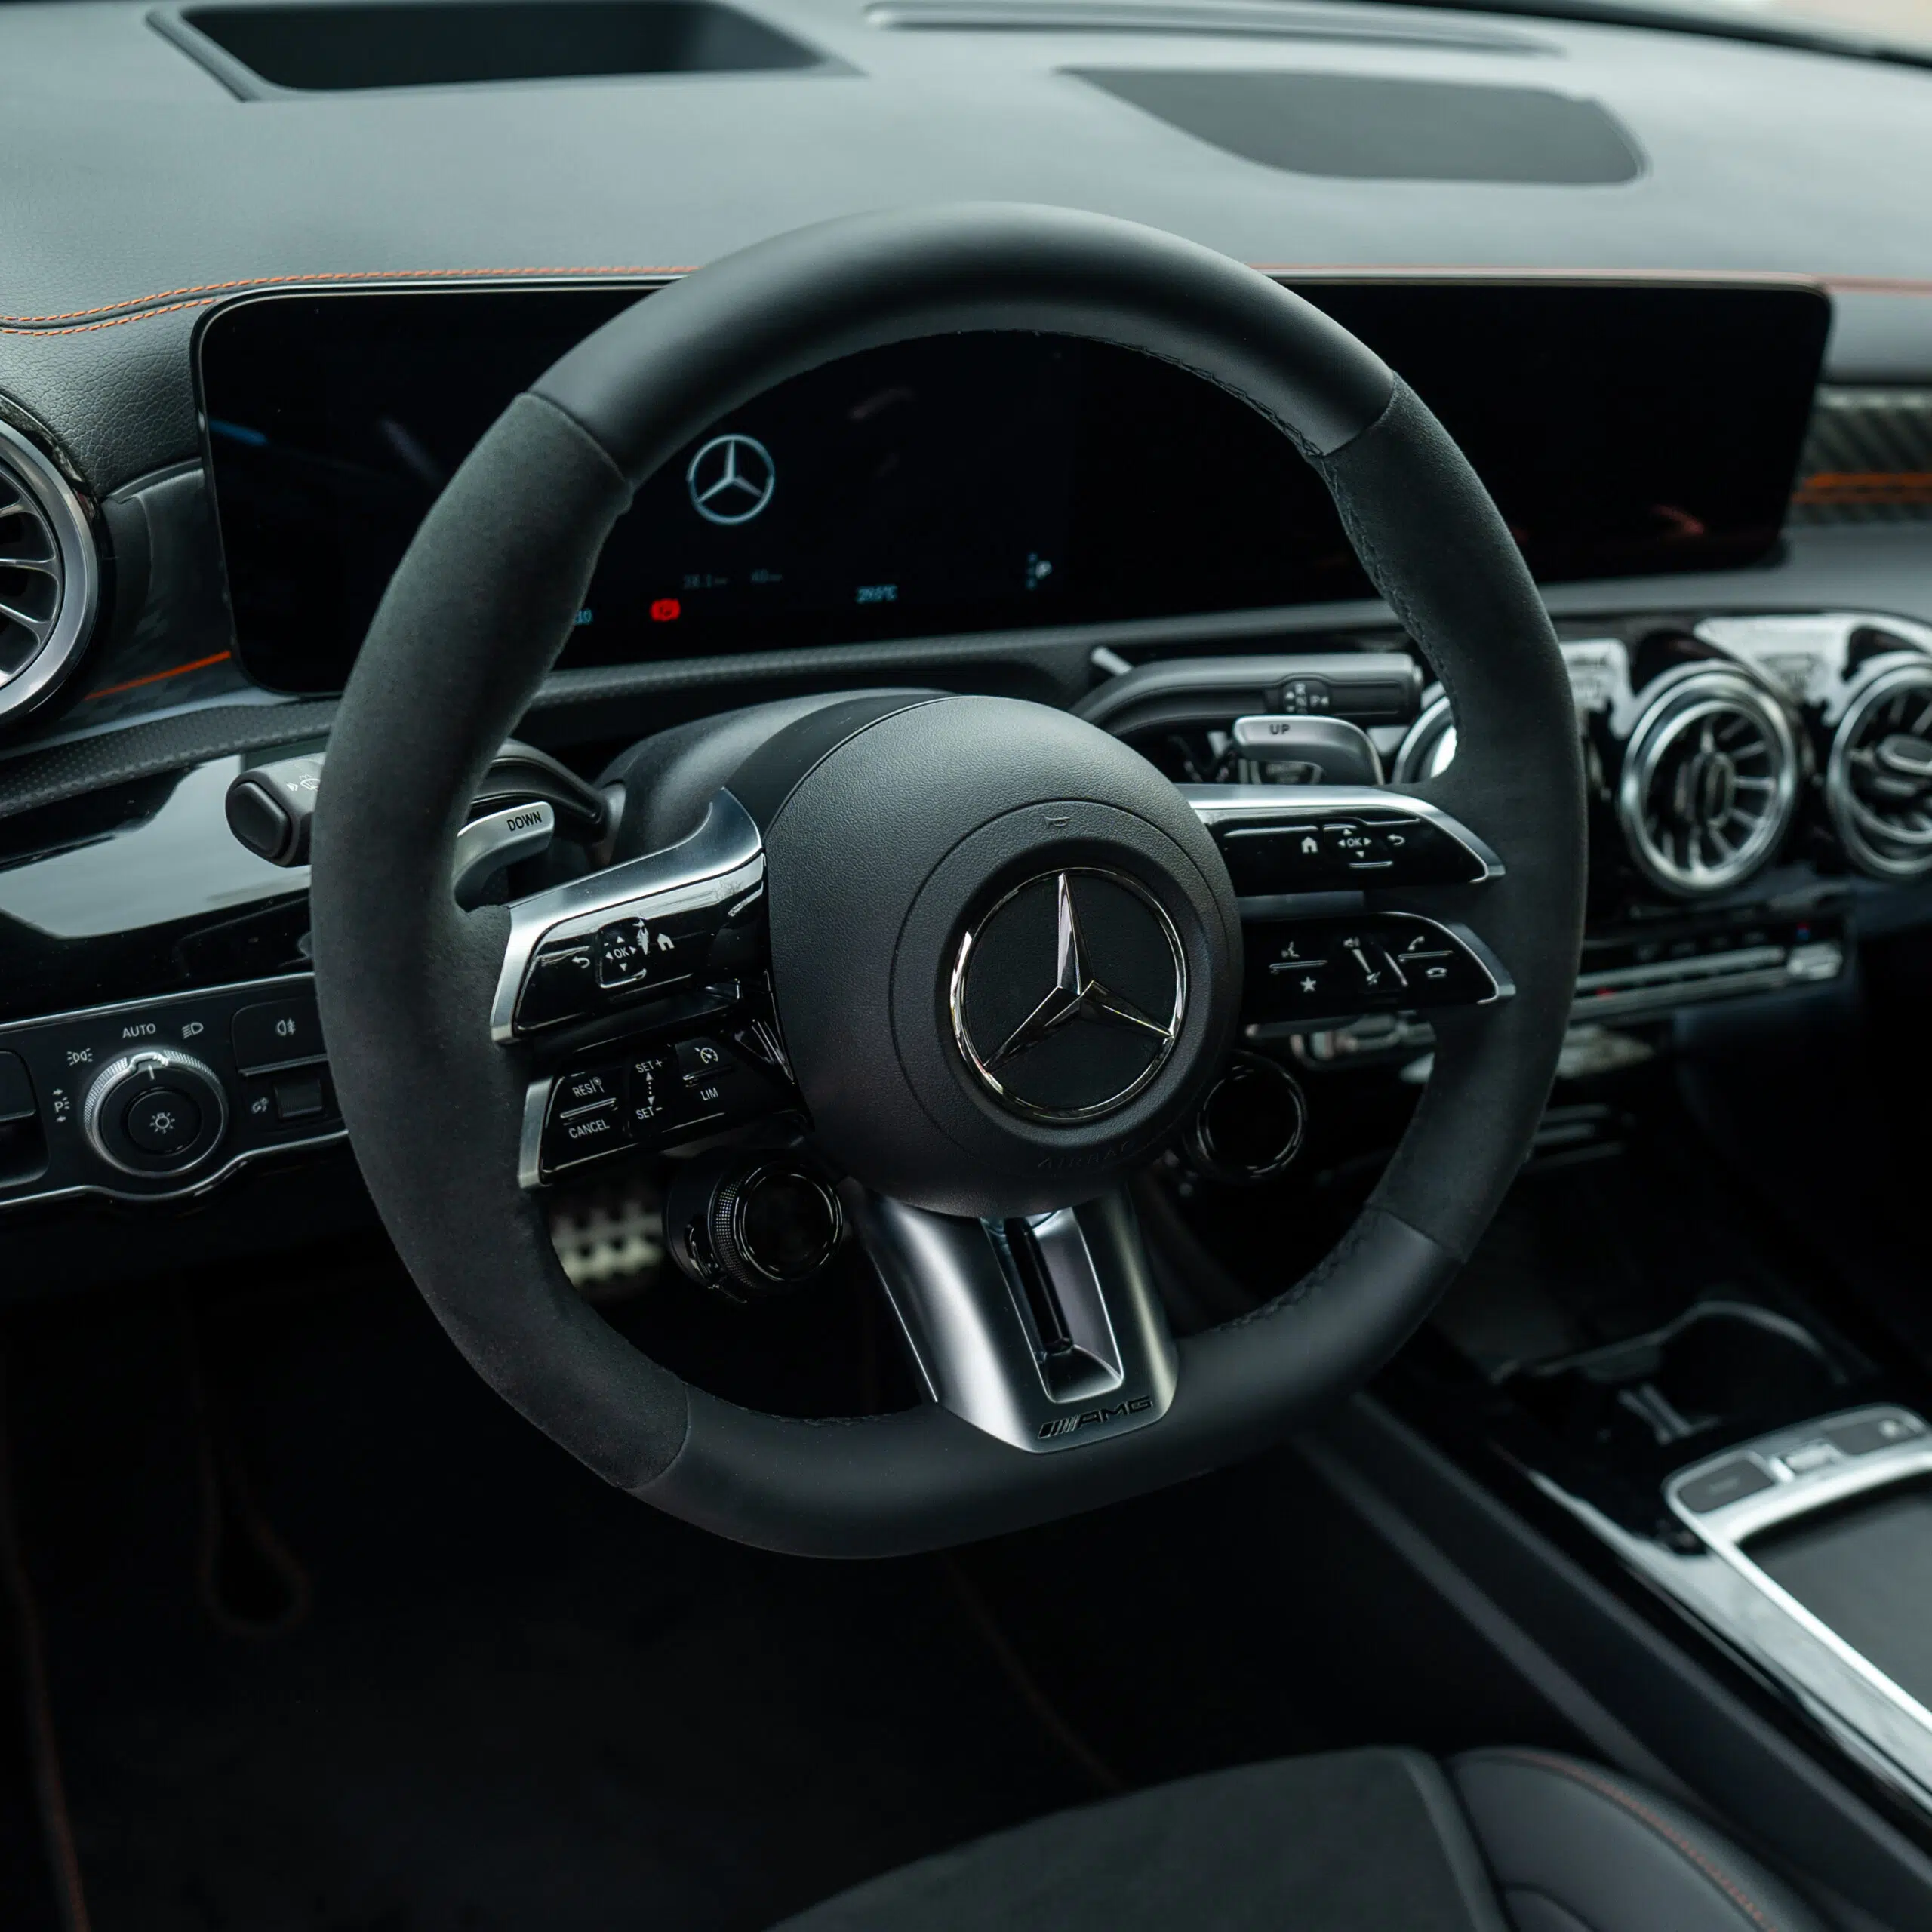 Steering Wheel of the Mercedes-AMG CLA 45 S